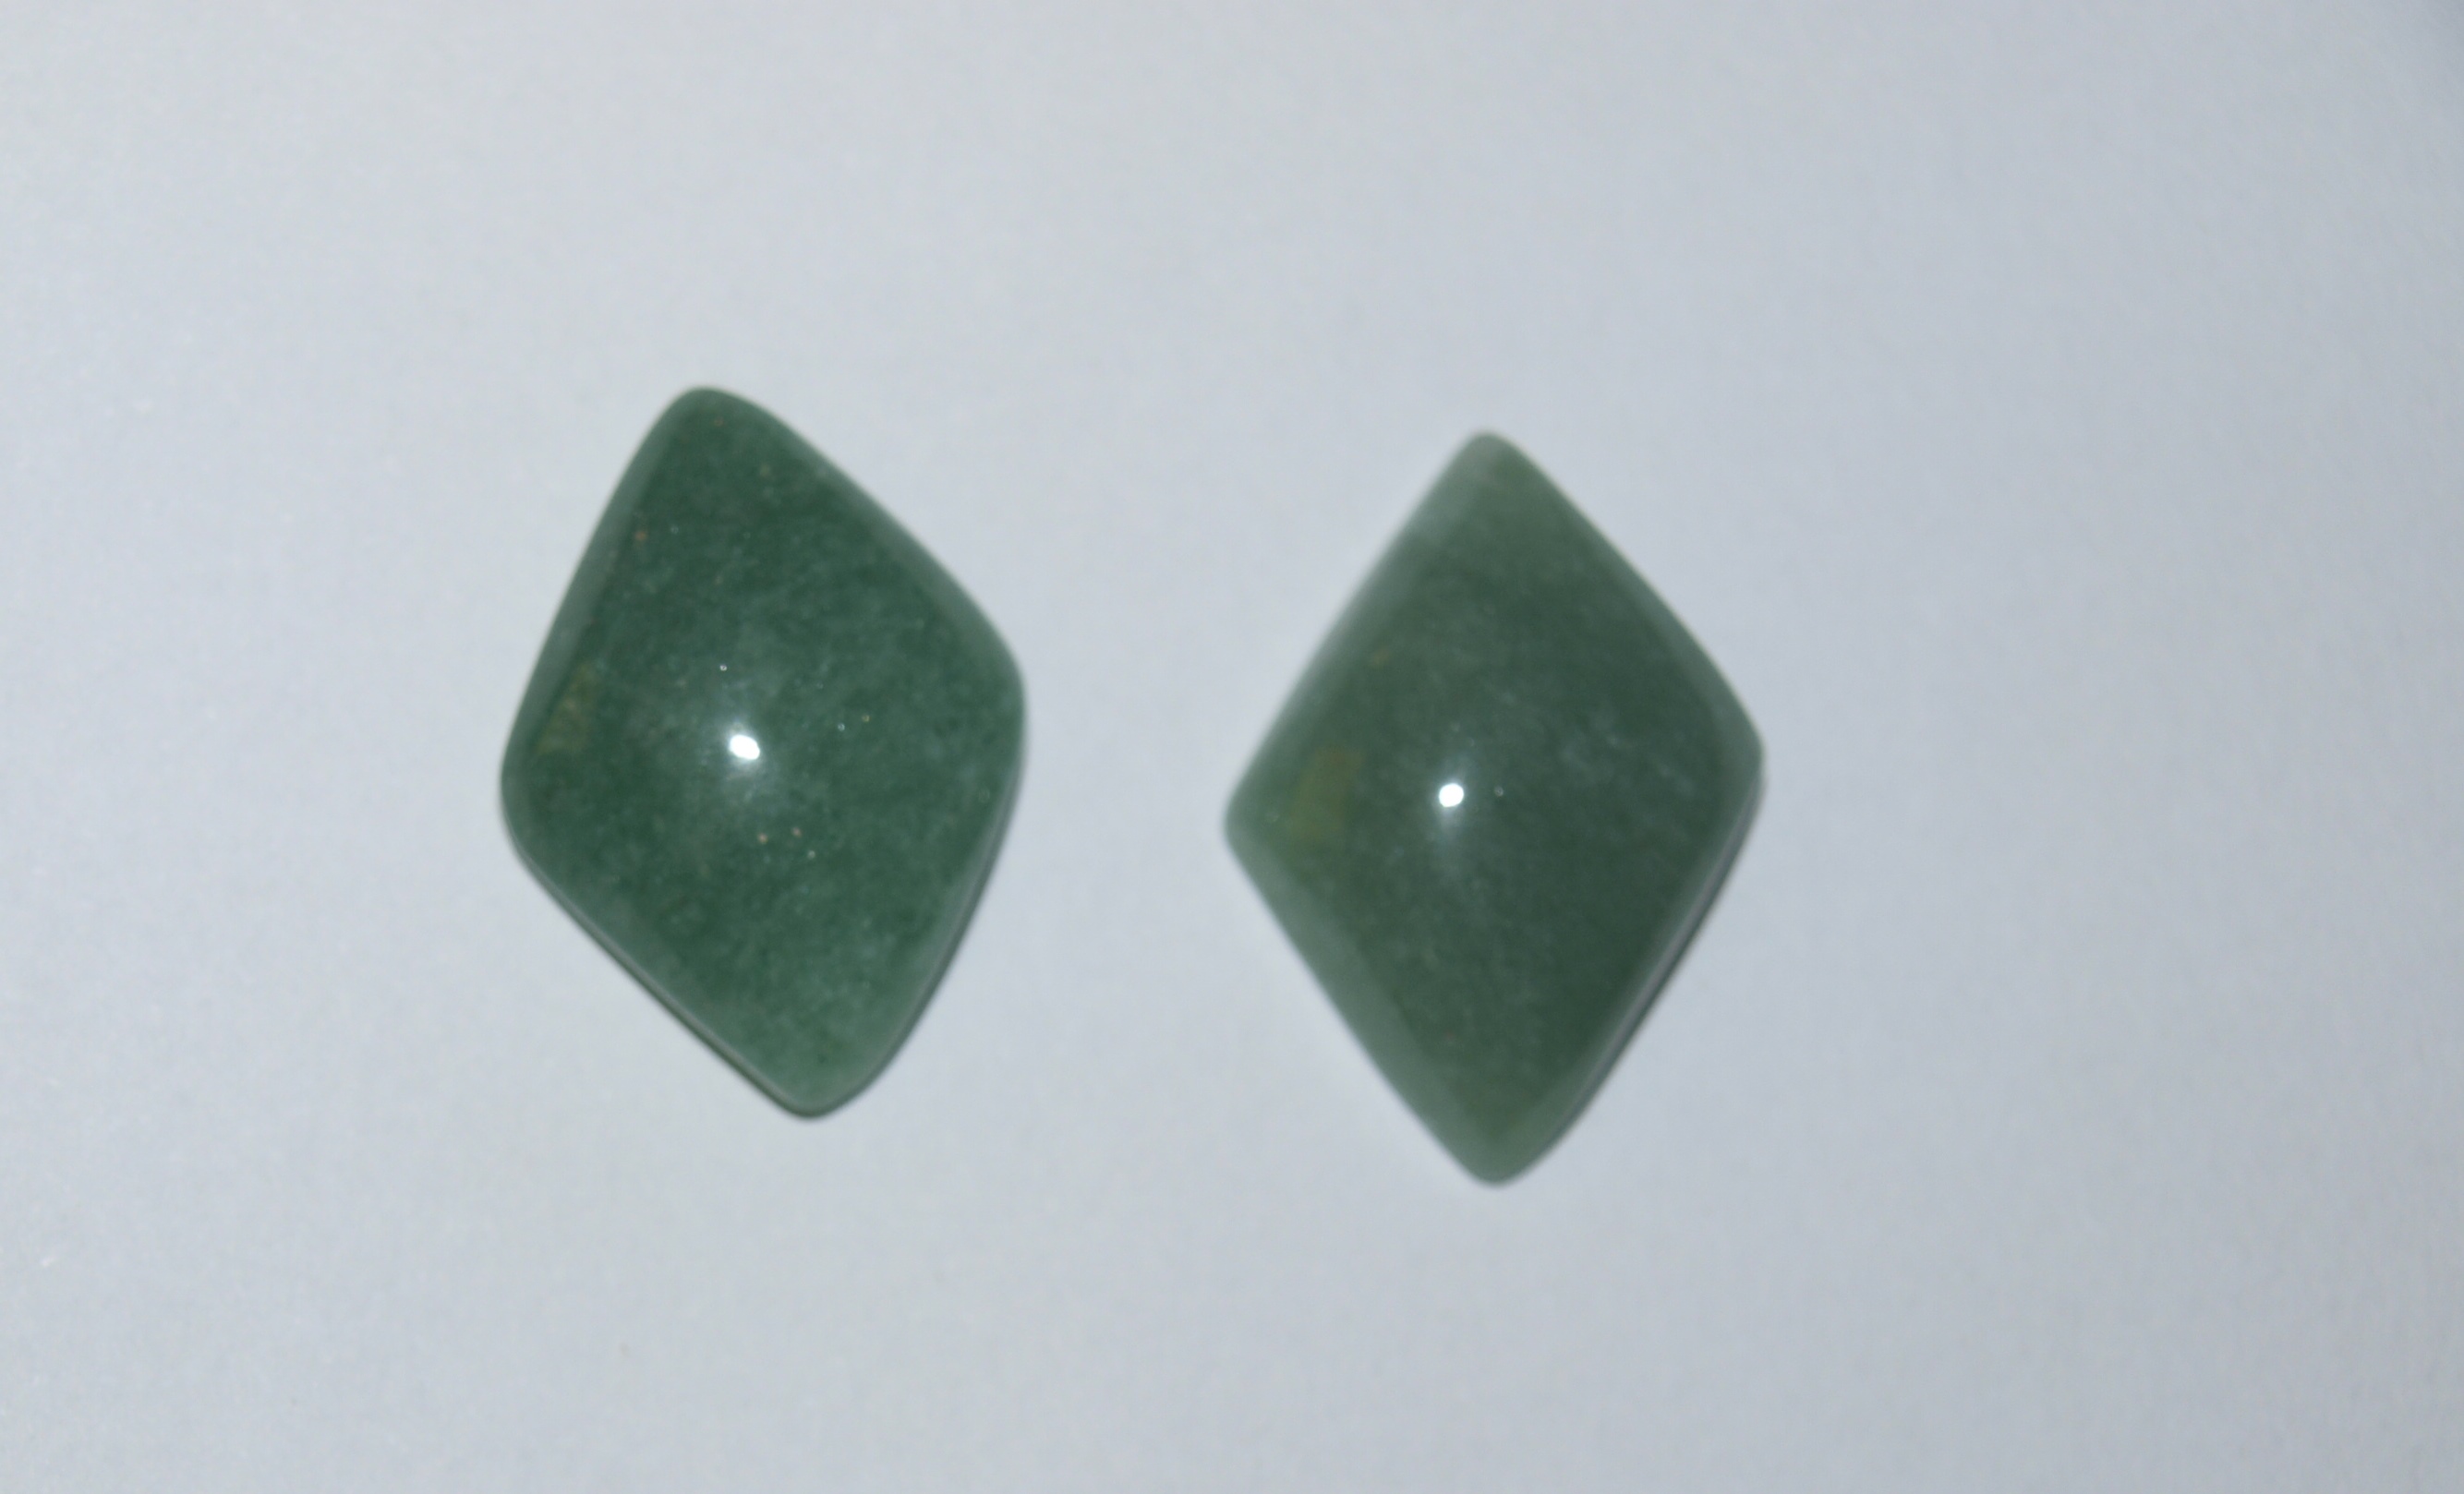 Stones from Uruguay - Green Aventurine Losango Cabochon for Earring Making